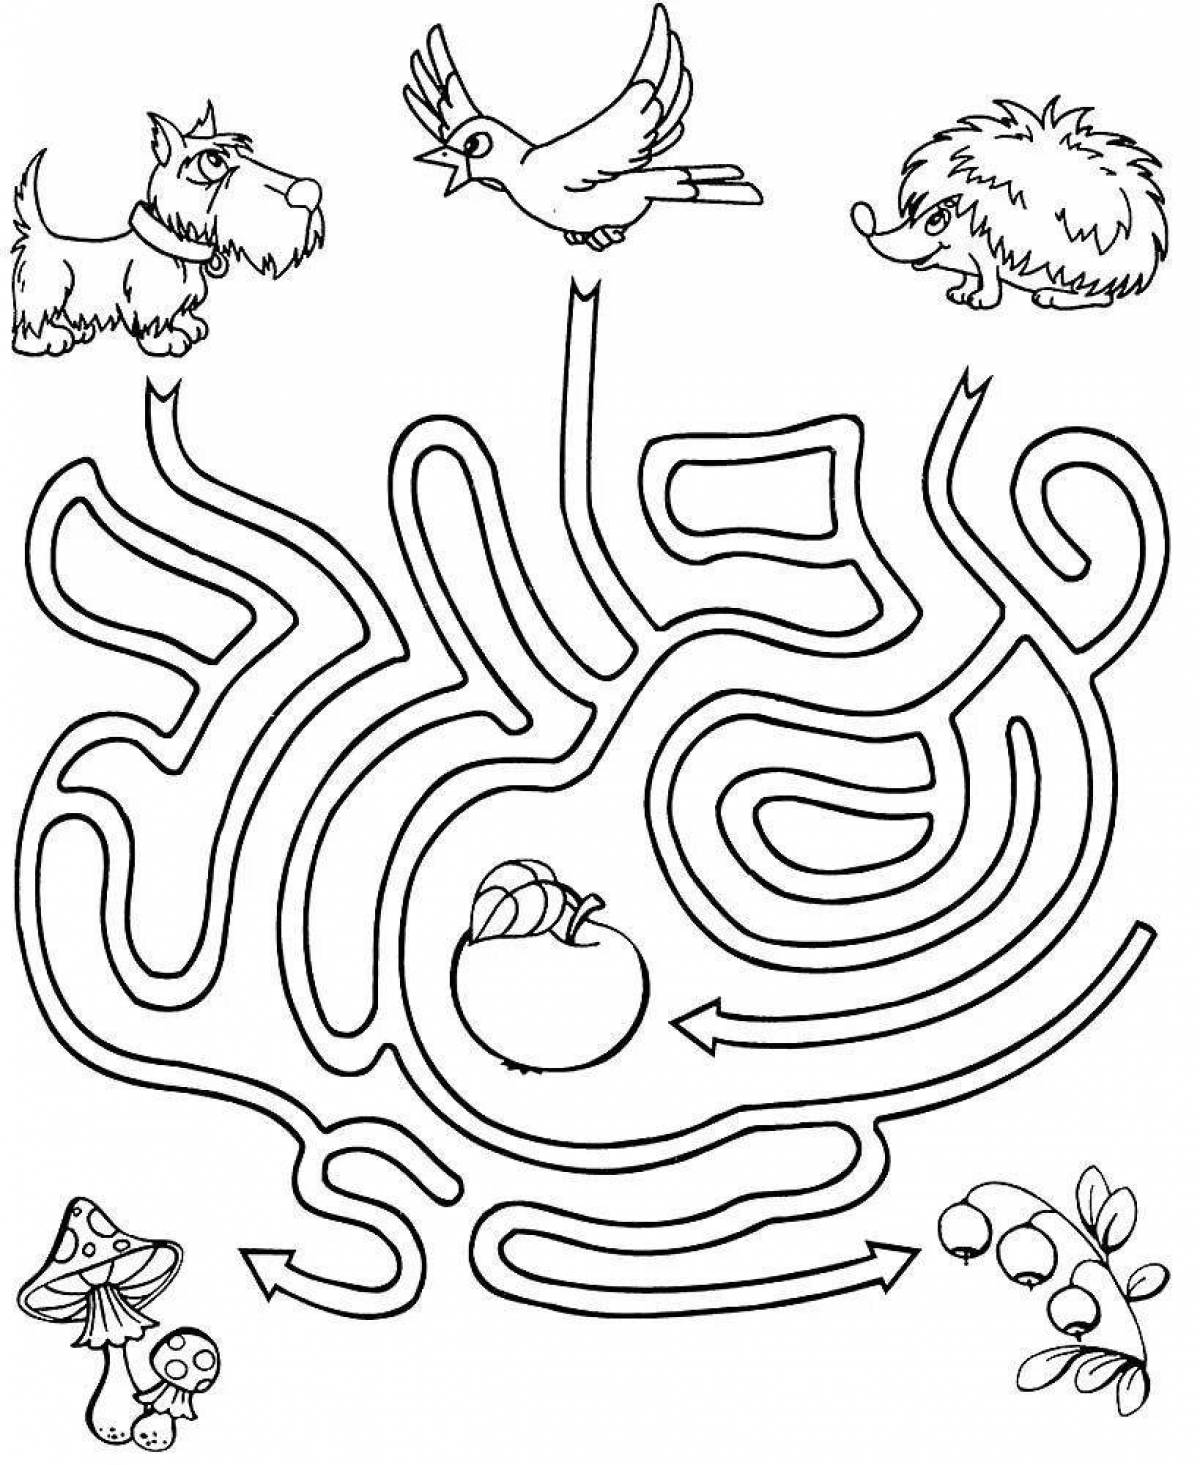 Creative coloring pages for 5 year olds